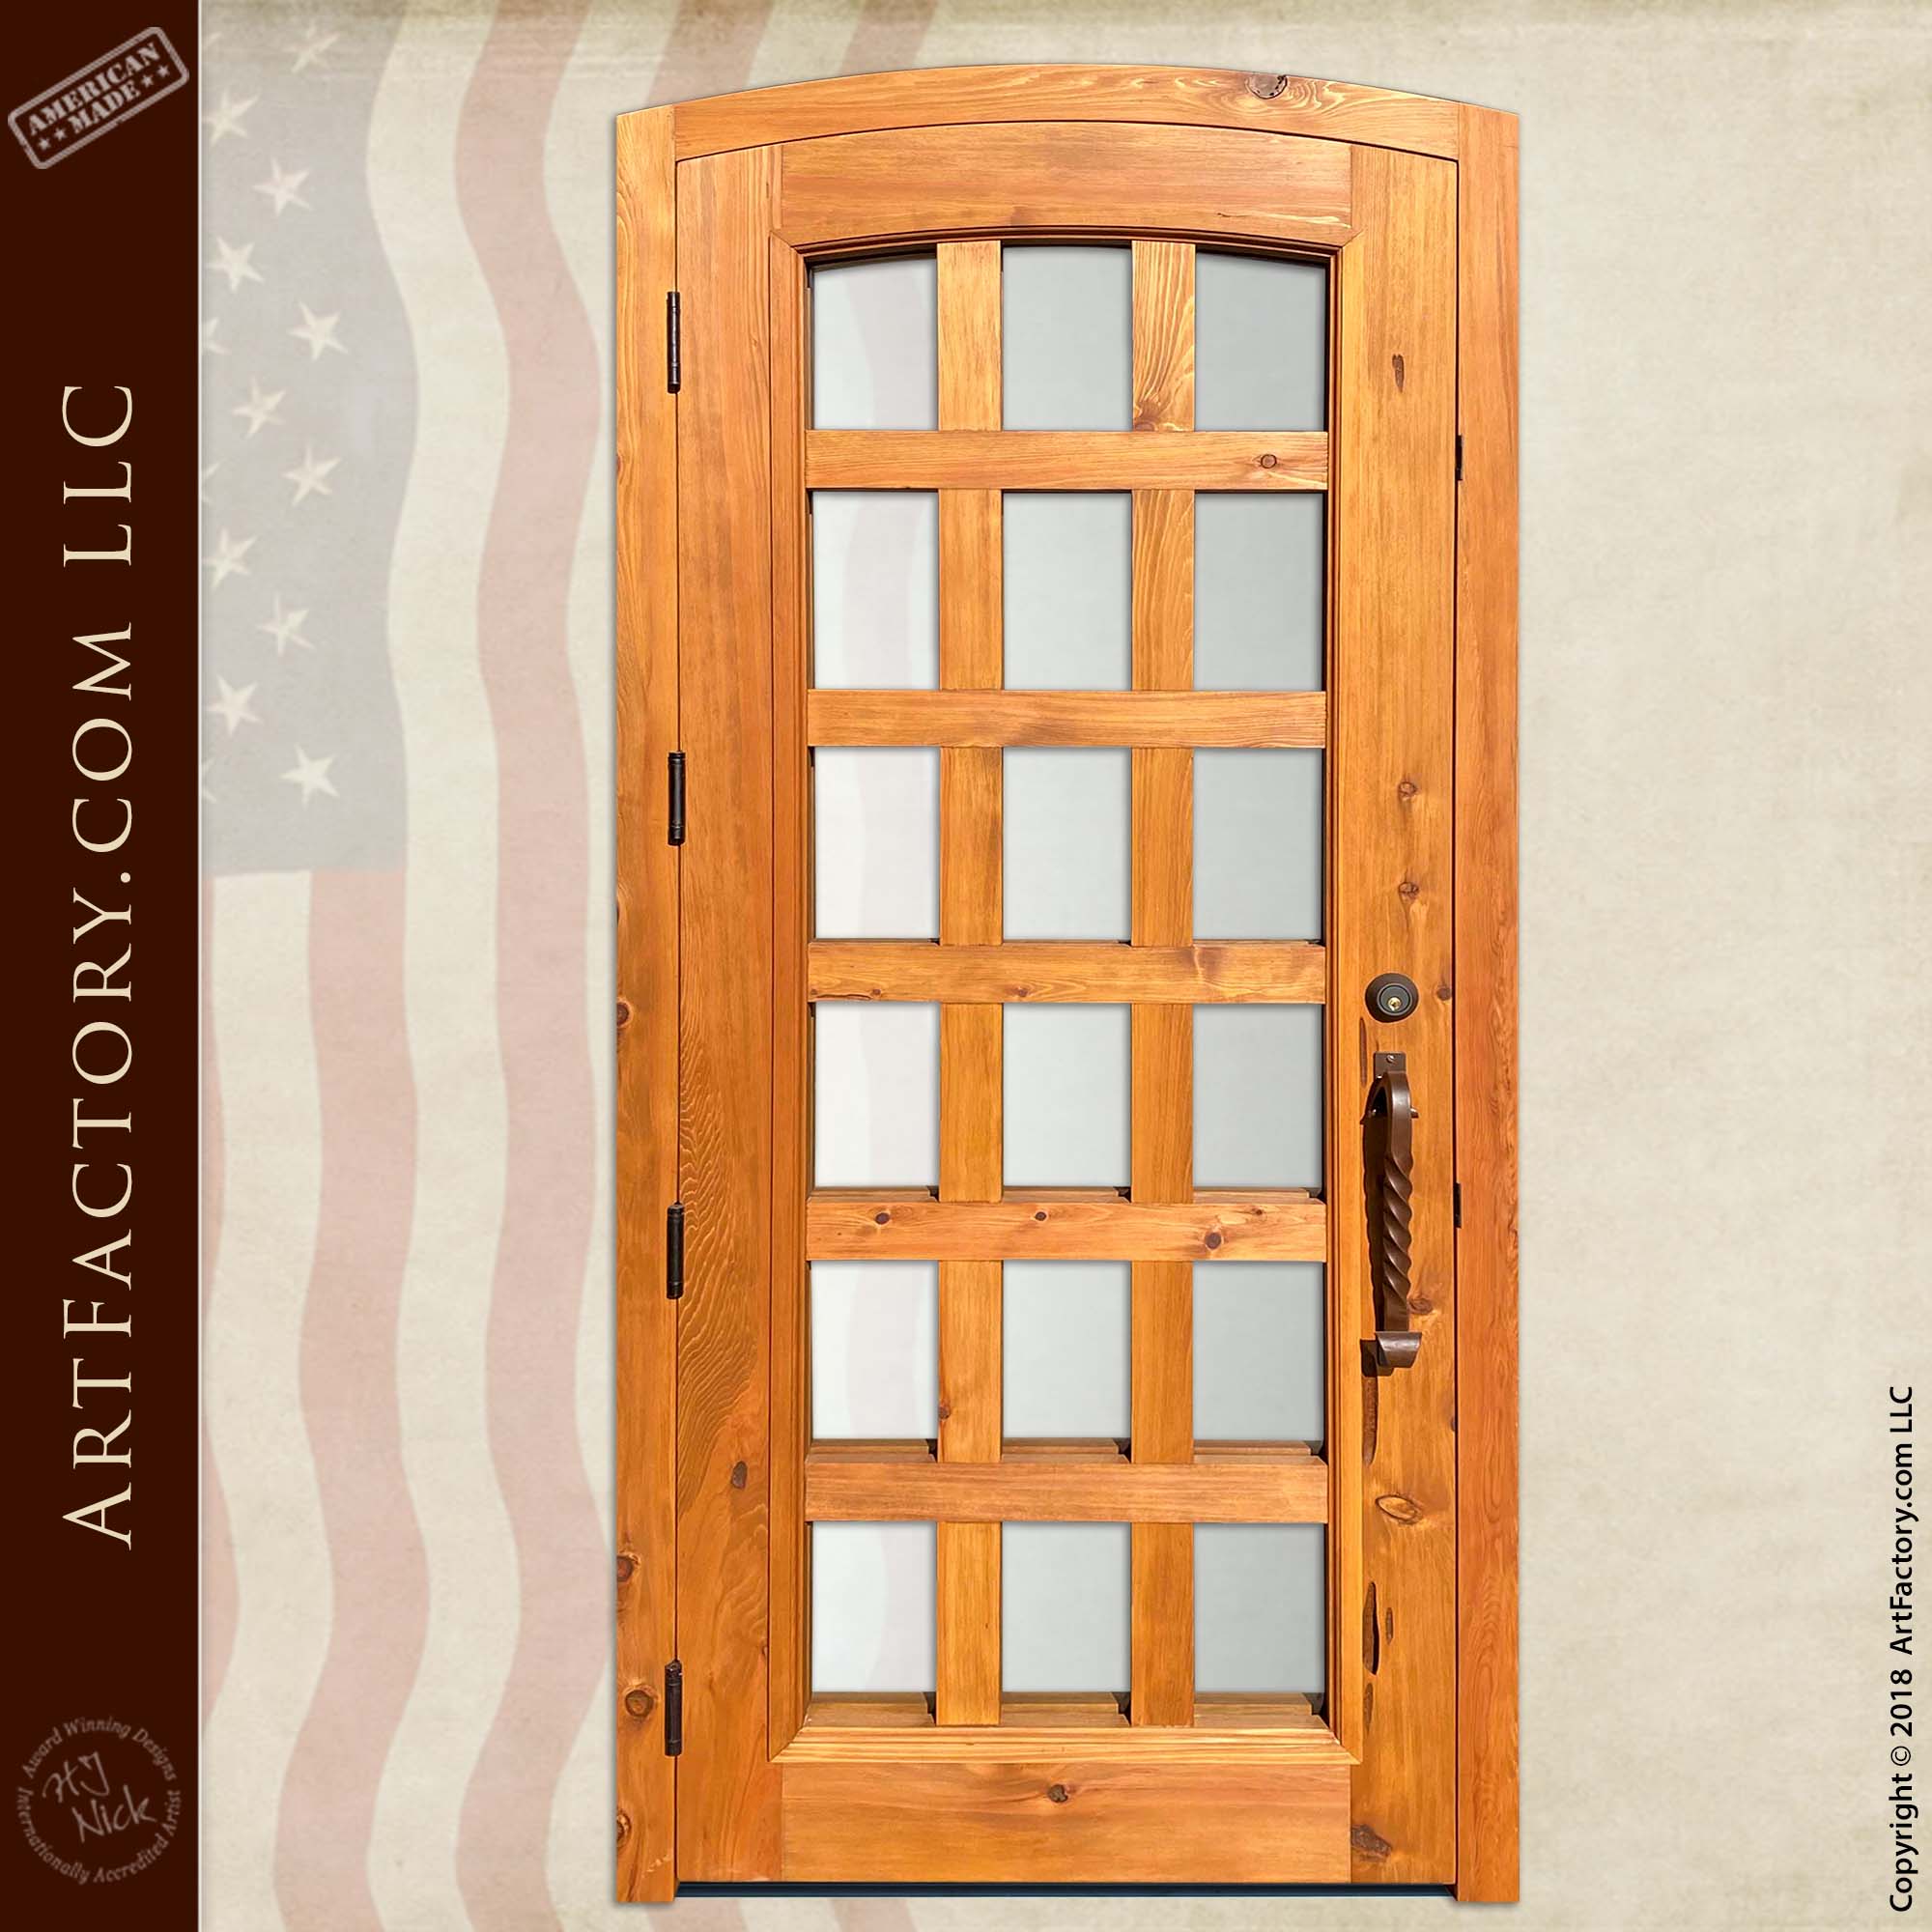 Eyebrow Arch Solid Wood Door with Wood Mullions